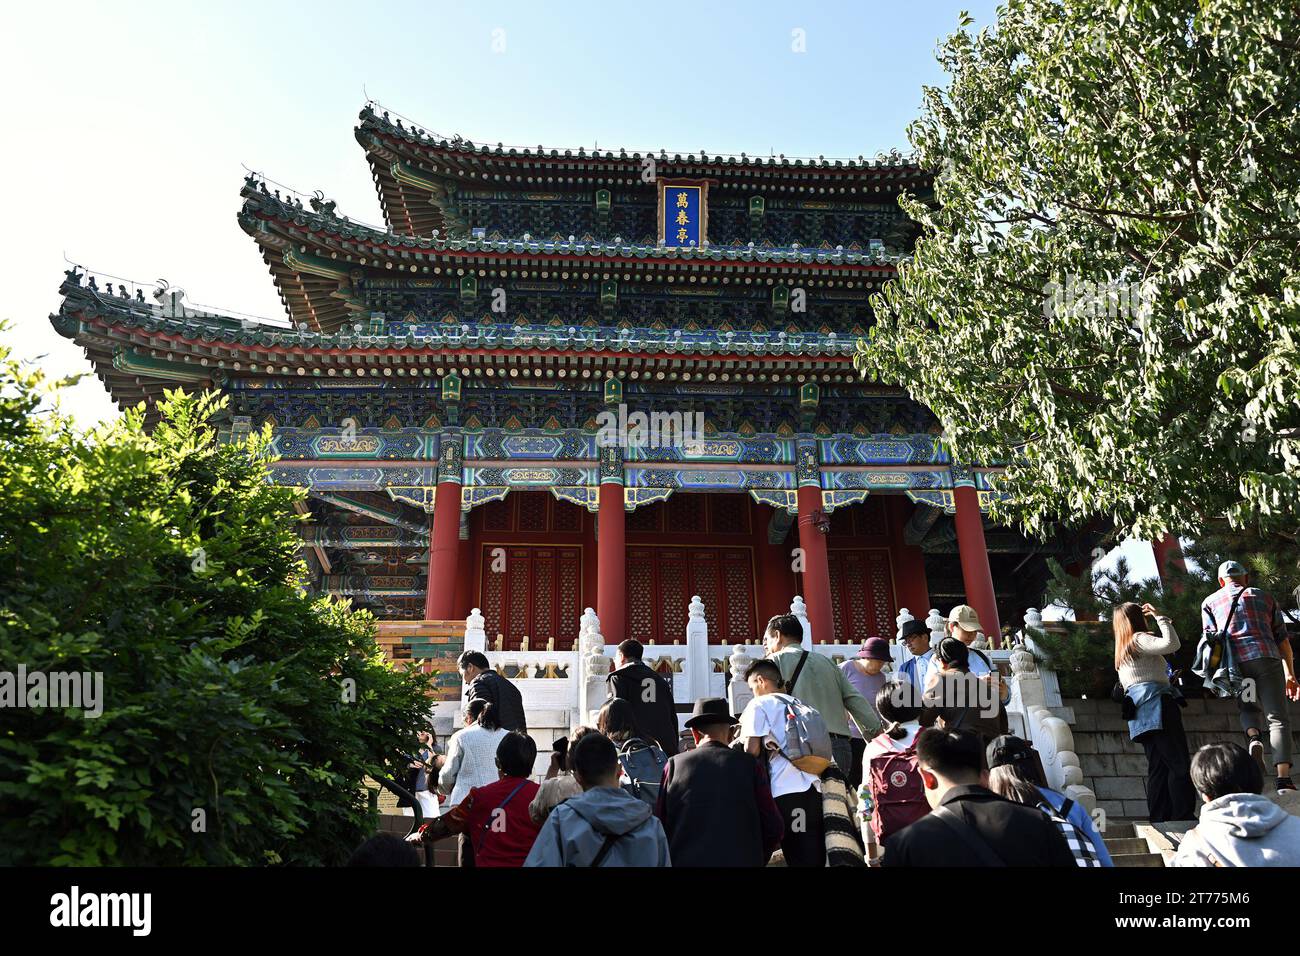 (231114) -- BEIJING, Nov. 14, 2023 (Xinhua) -- This photo taken on Oct. 27, 2023 shows the Wanchun pavilion on the mountain top of the Jingshan park on the Beijing Central Axis in Beijing, capital of China. First created in the Yuan Dynasty (1271-1368), the Beijing Central Axis, or Zhongzhouxian, stretches 7.8 km between the Yongding Gate in the south of the city and the Drum Tower and Bell Tower in the north. Most of the major old-city buildings of Beijing sit along this axis. Chinese authorities have planned to recommend the Beijing Central Axis as China's 2024 world cultural heritage appl Stock Photo